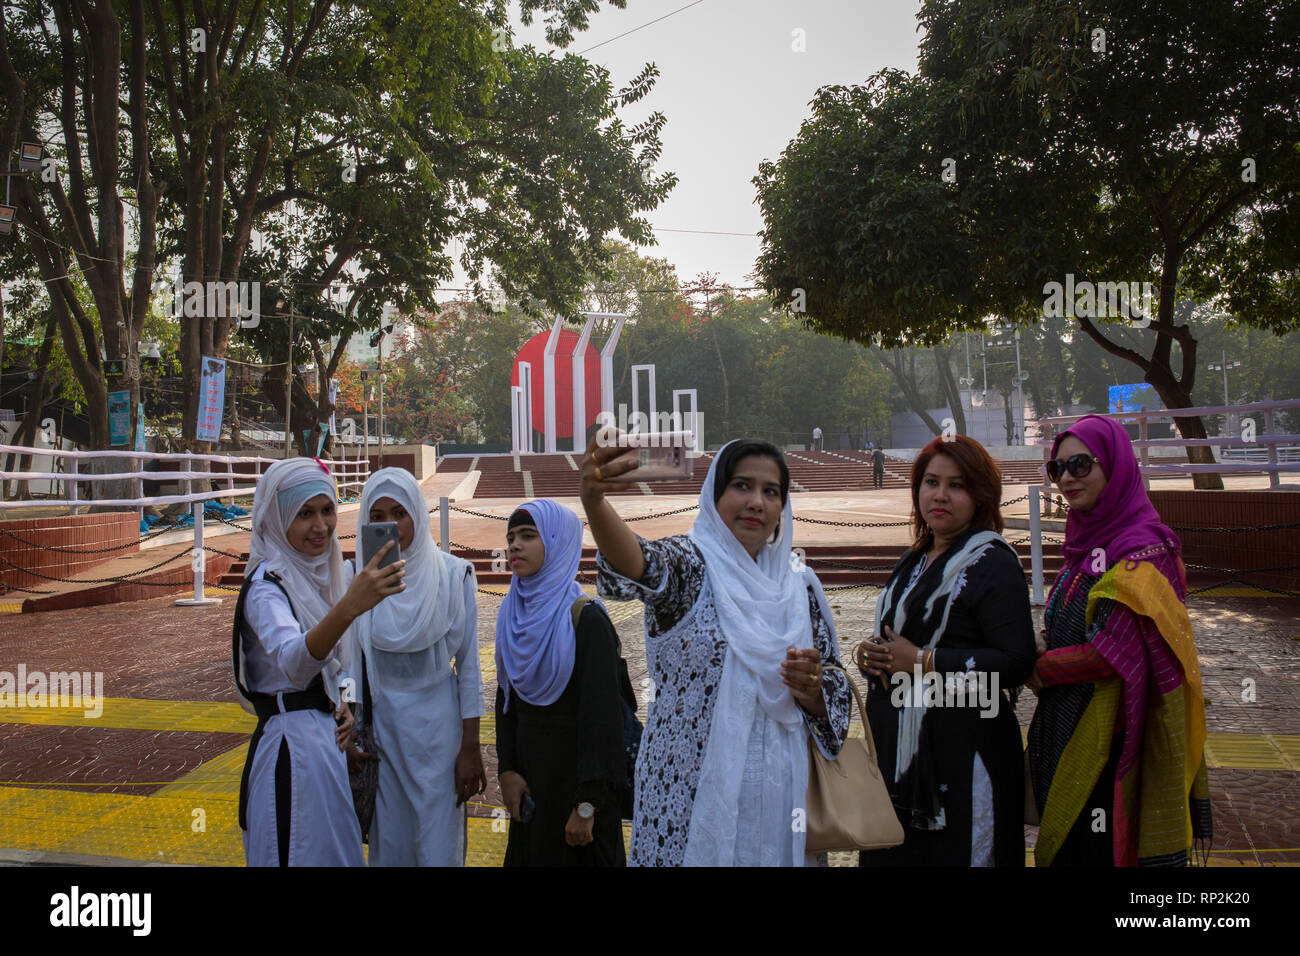 Dhaka, Bangladesh. 20th Feb, 2019.  Bangladeshi people take selfie in front of the language matyrs monument in Dhaka, Bangladesh on February 20, 2019.  The nation will pay tribute to the Bangla language movement martyrs who sacrificed their life for their mother tongue in 1952, while the United Nations Educational Scientific and Cultural Organization (UNESCO) declared 21 February as the International Mother Language Day. Credit: zakir hossain chowdhury zakir/Alamy Live News Stock Photo